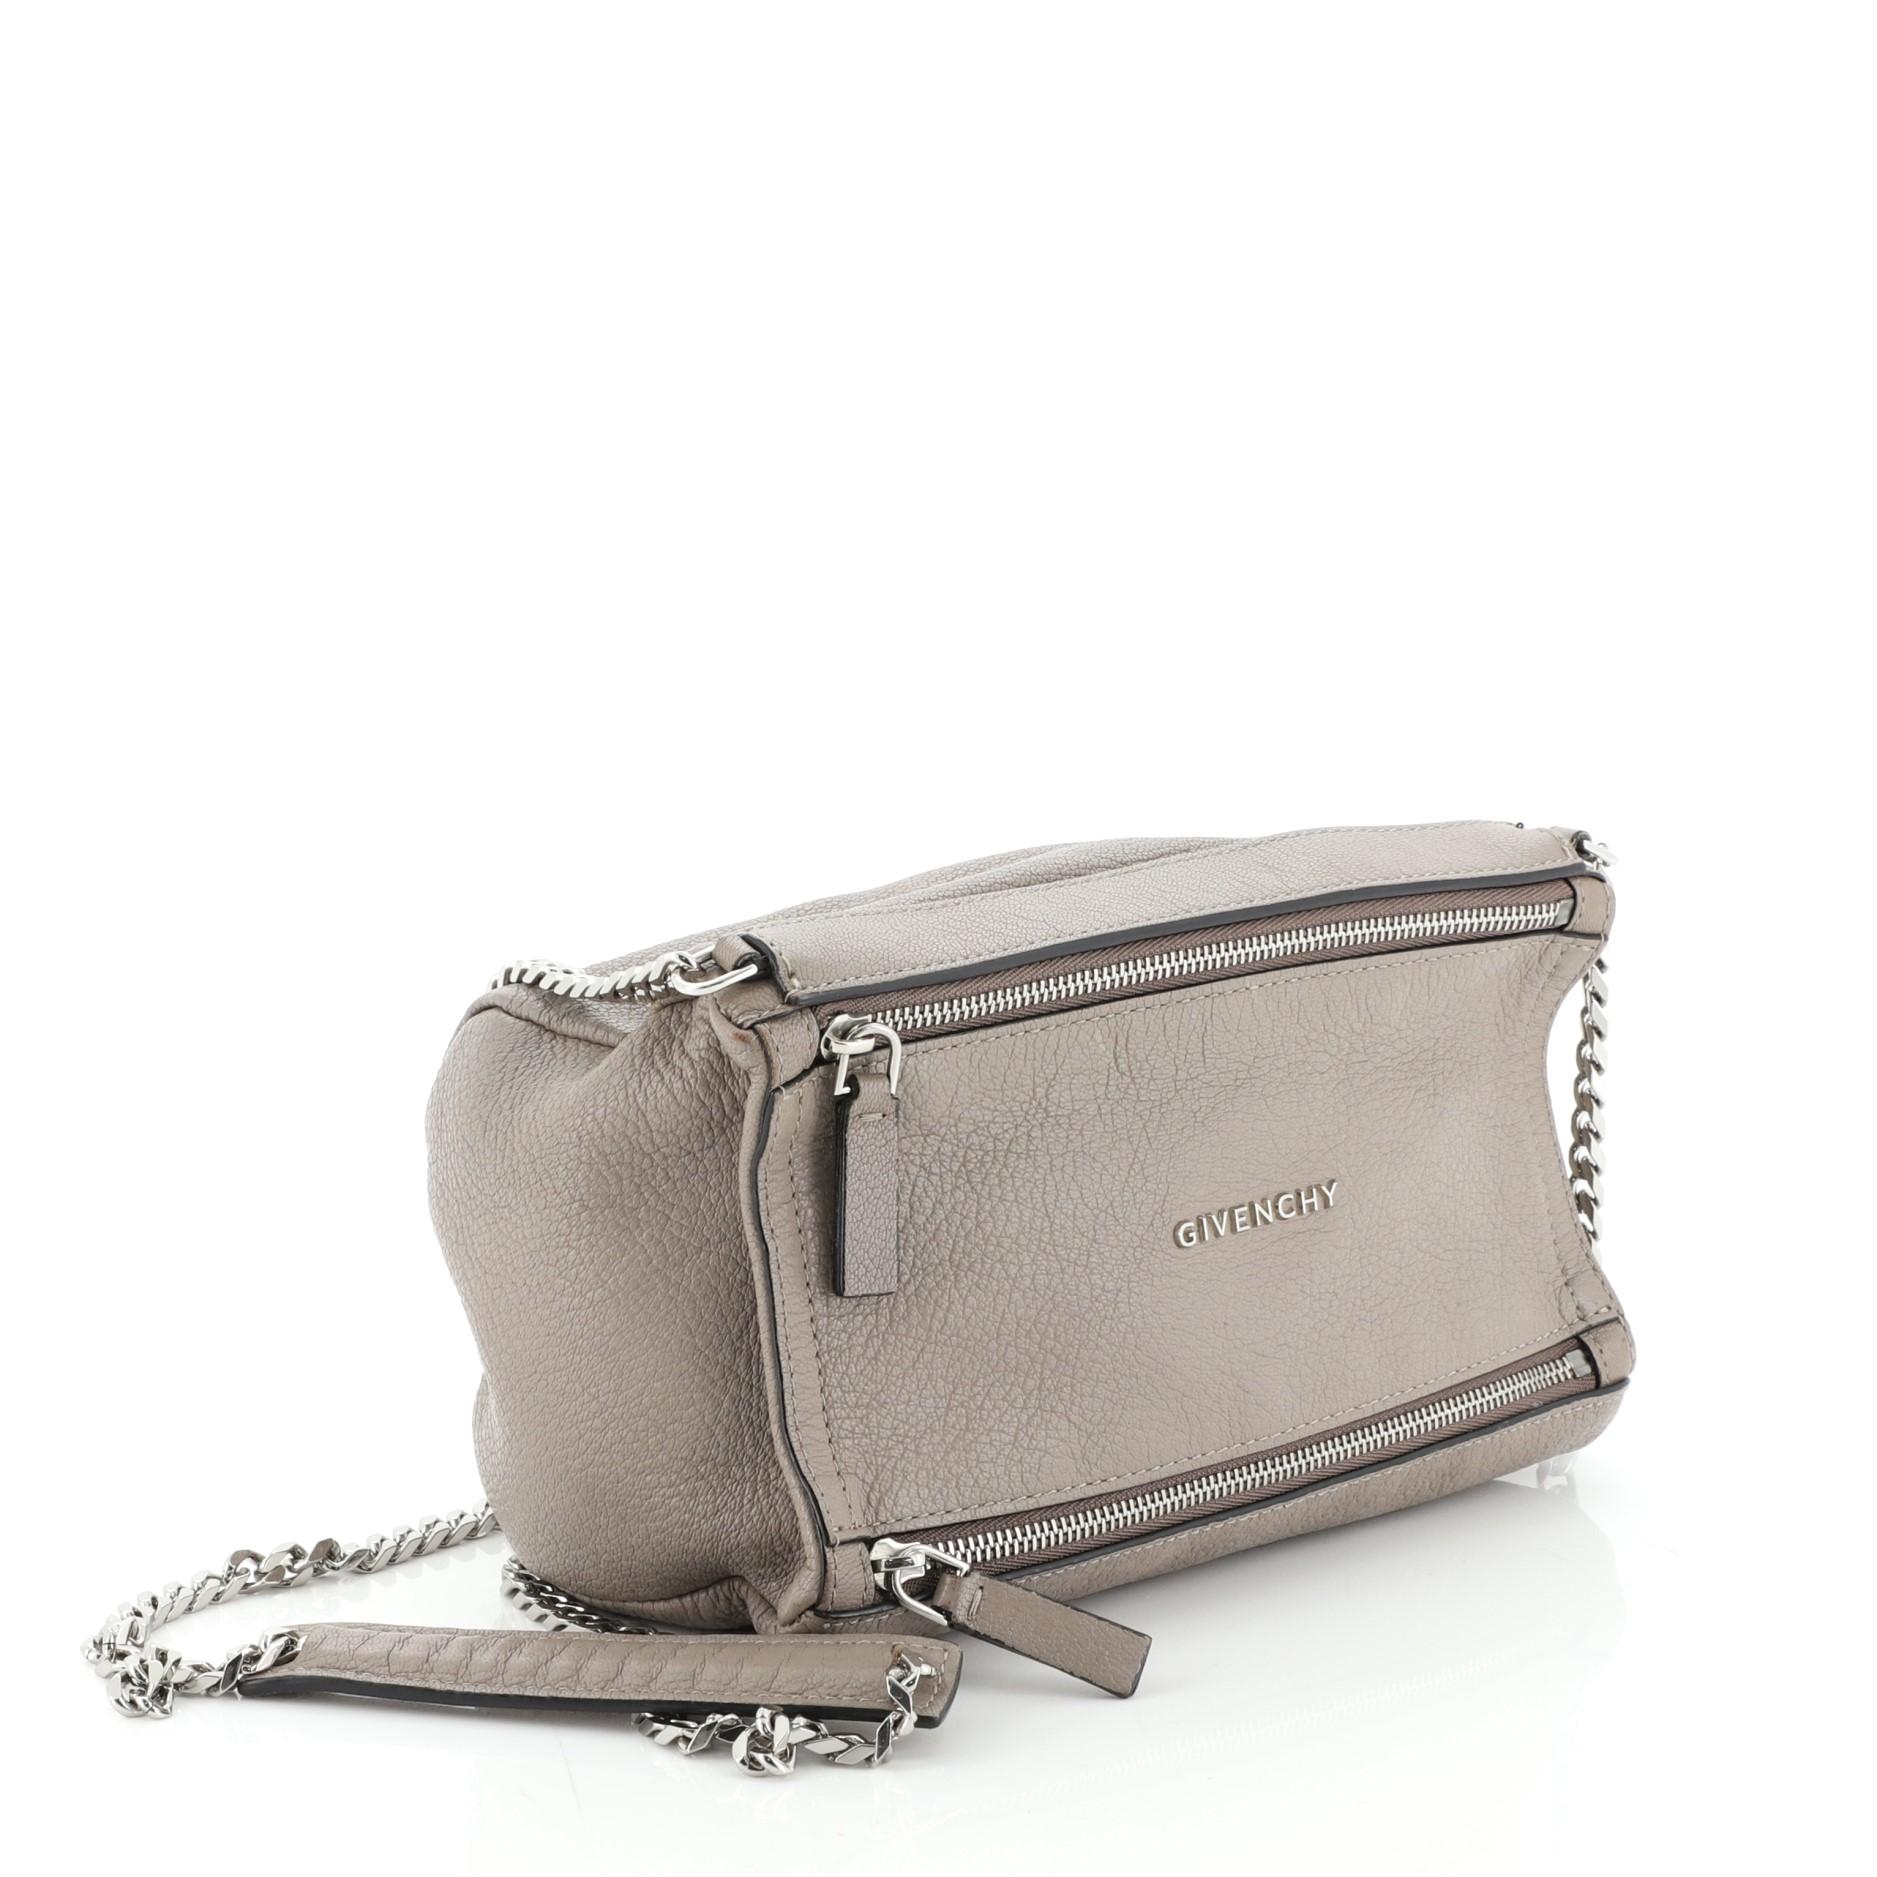 This Givenchy Pandora Chain Bag Leather Mini, crafted from neutral leather, features a chain link shoulder strap, Givenchy logo at the center, and silver-tone hardware. Its double zip fastenings open to a black fabric compartment. 

Estimated Retail